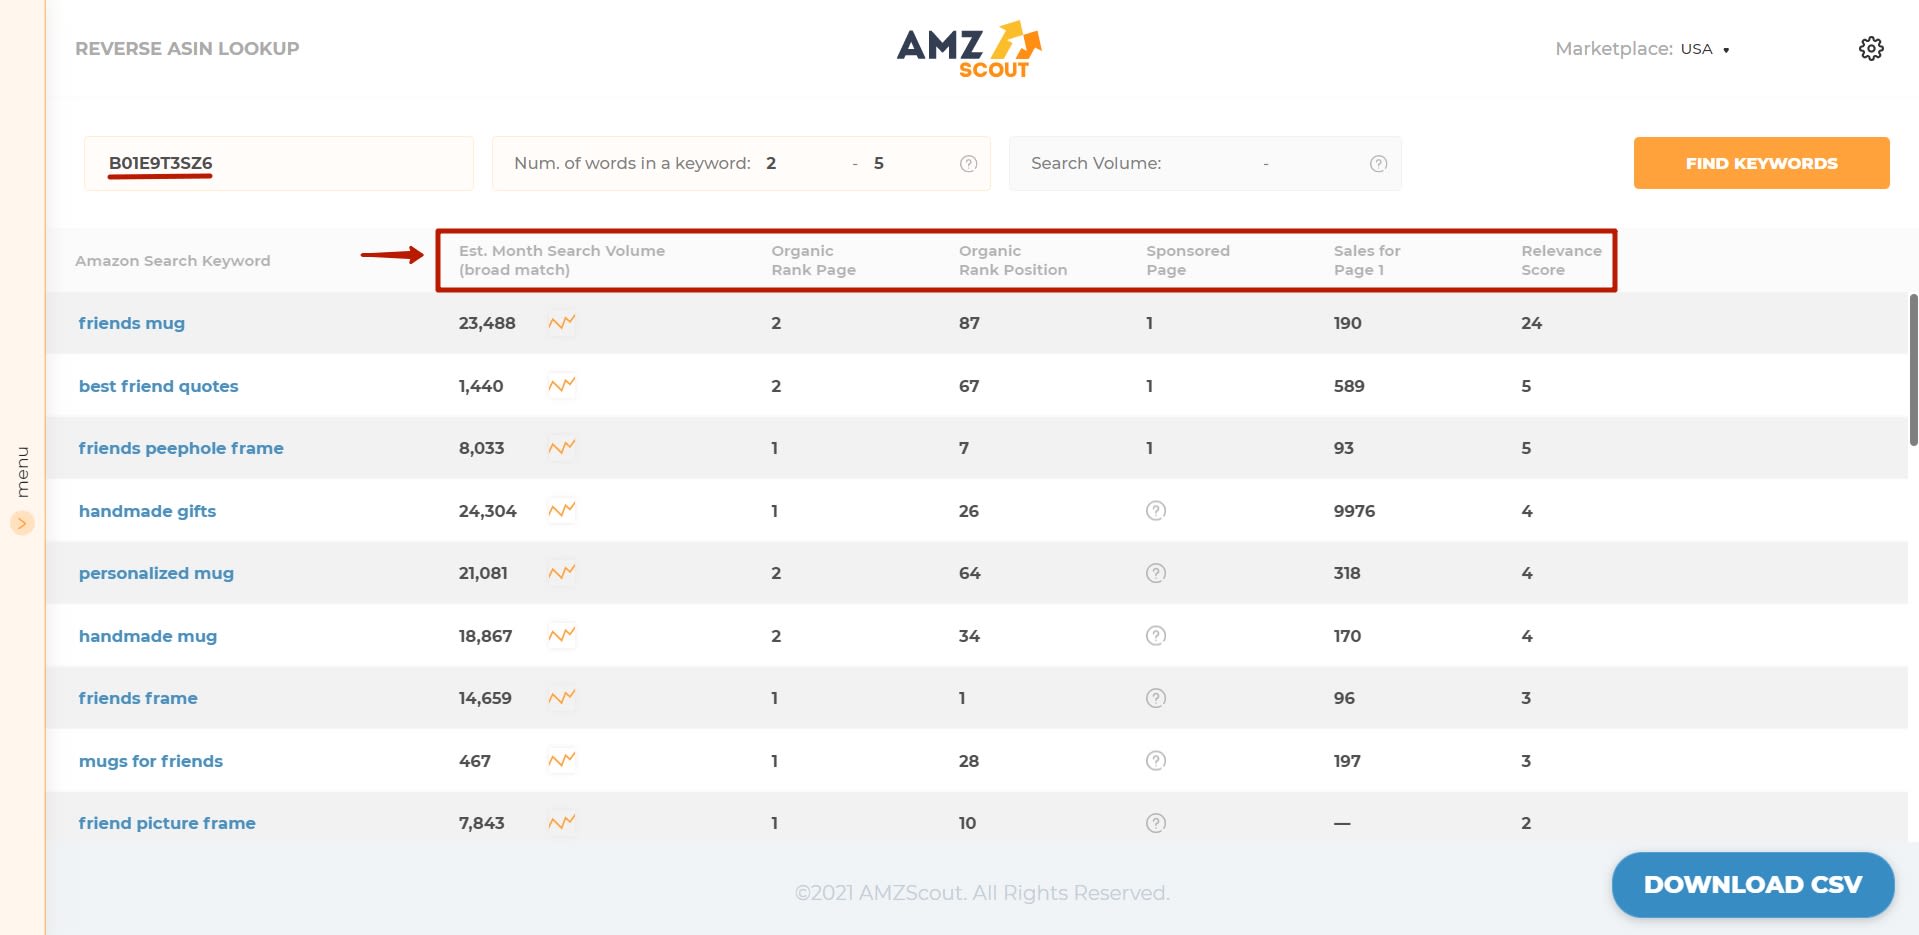 Use AMZScout to analyze competitors keywords on Amazon